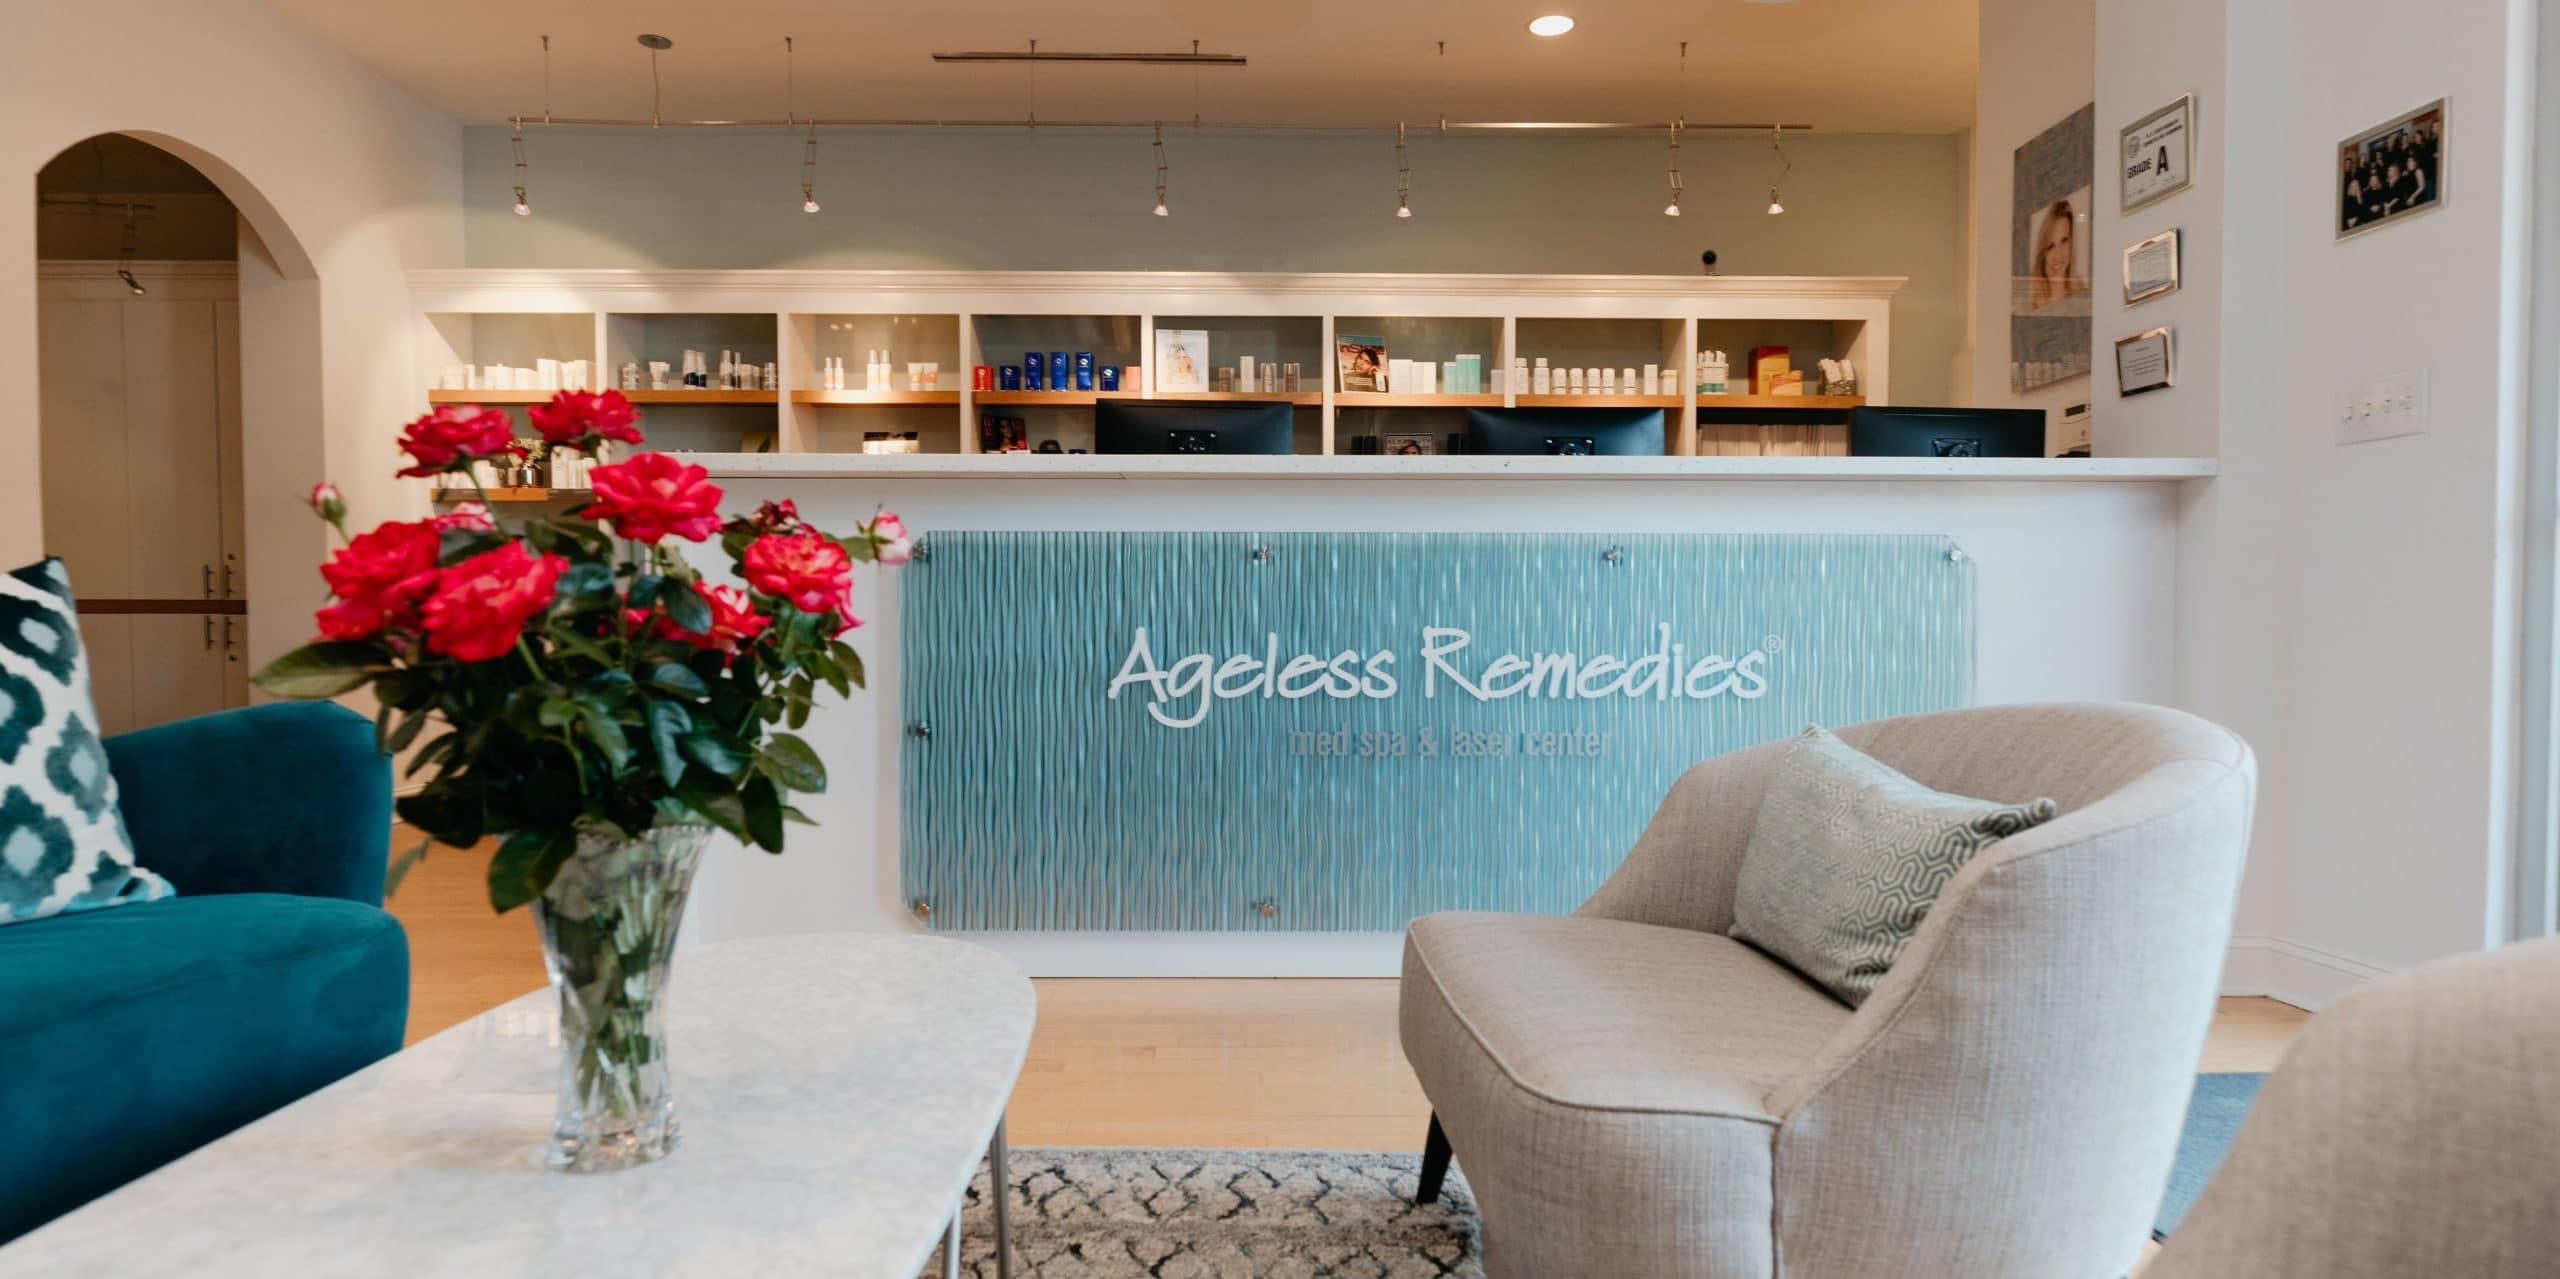 Ageless Remedies Med Spa and Laser Center front desk